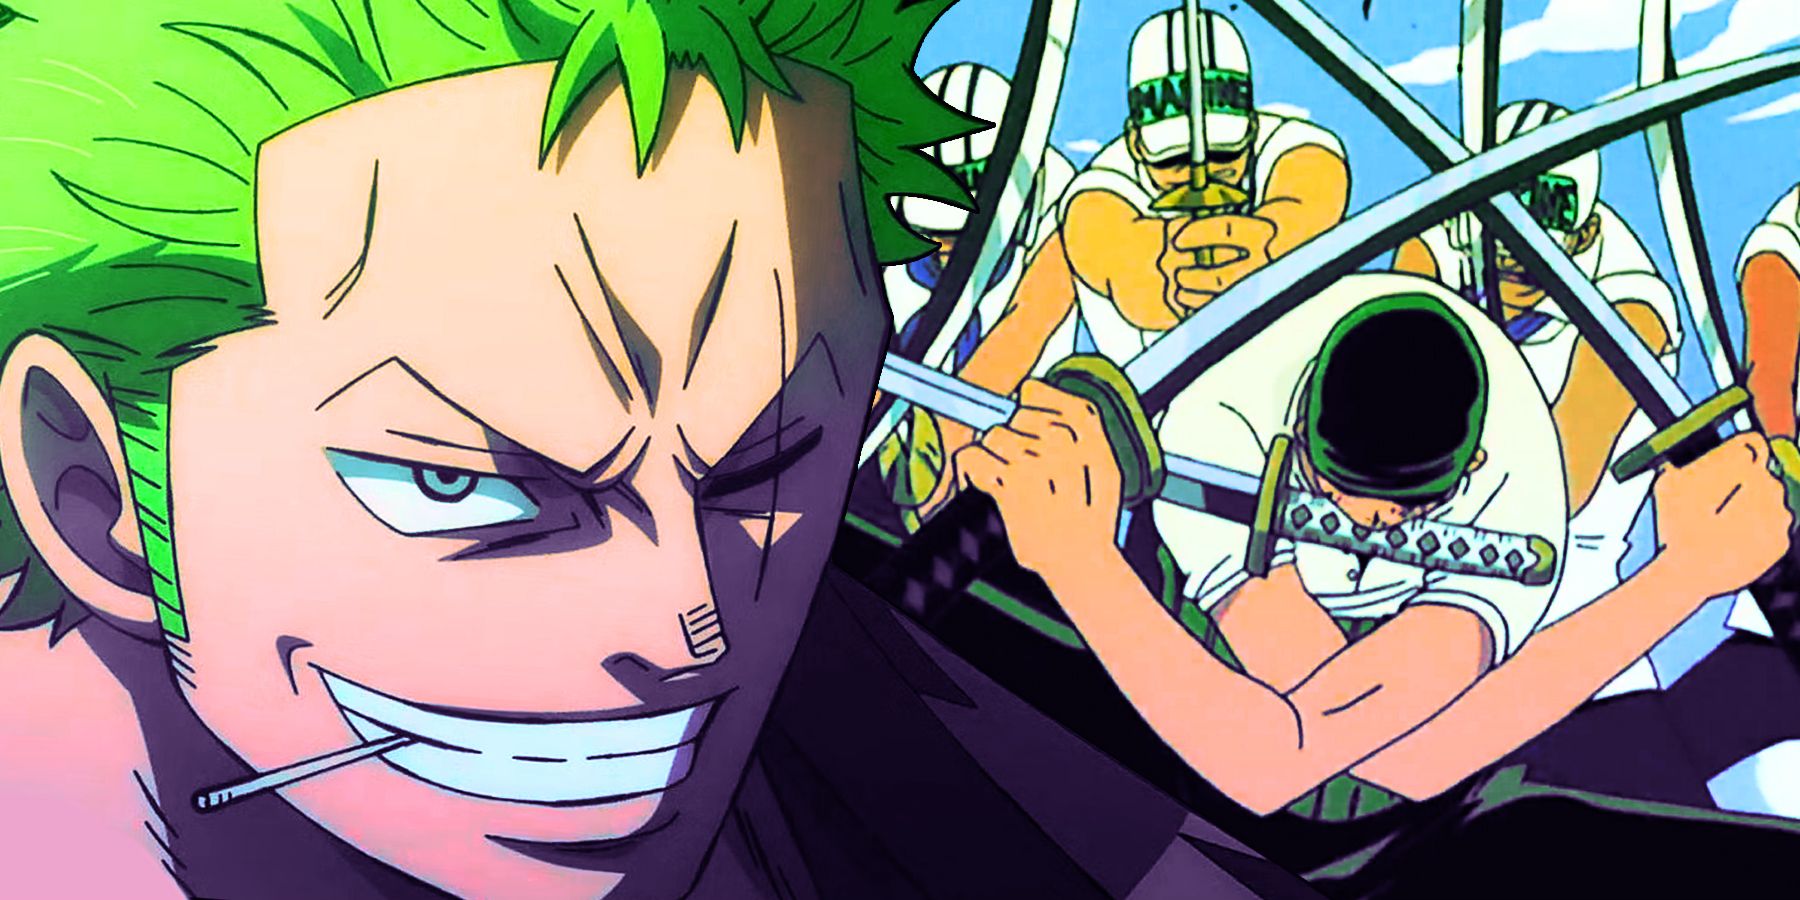 One Piece's Roronoa Zoro grinning with a toothpick while fighting marines